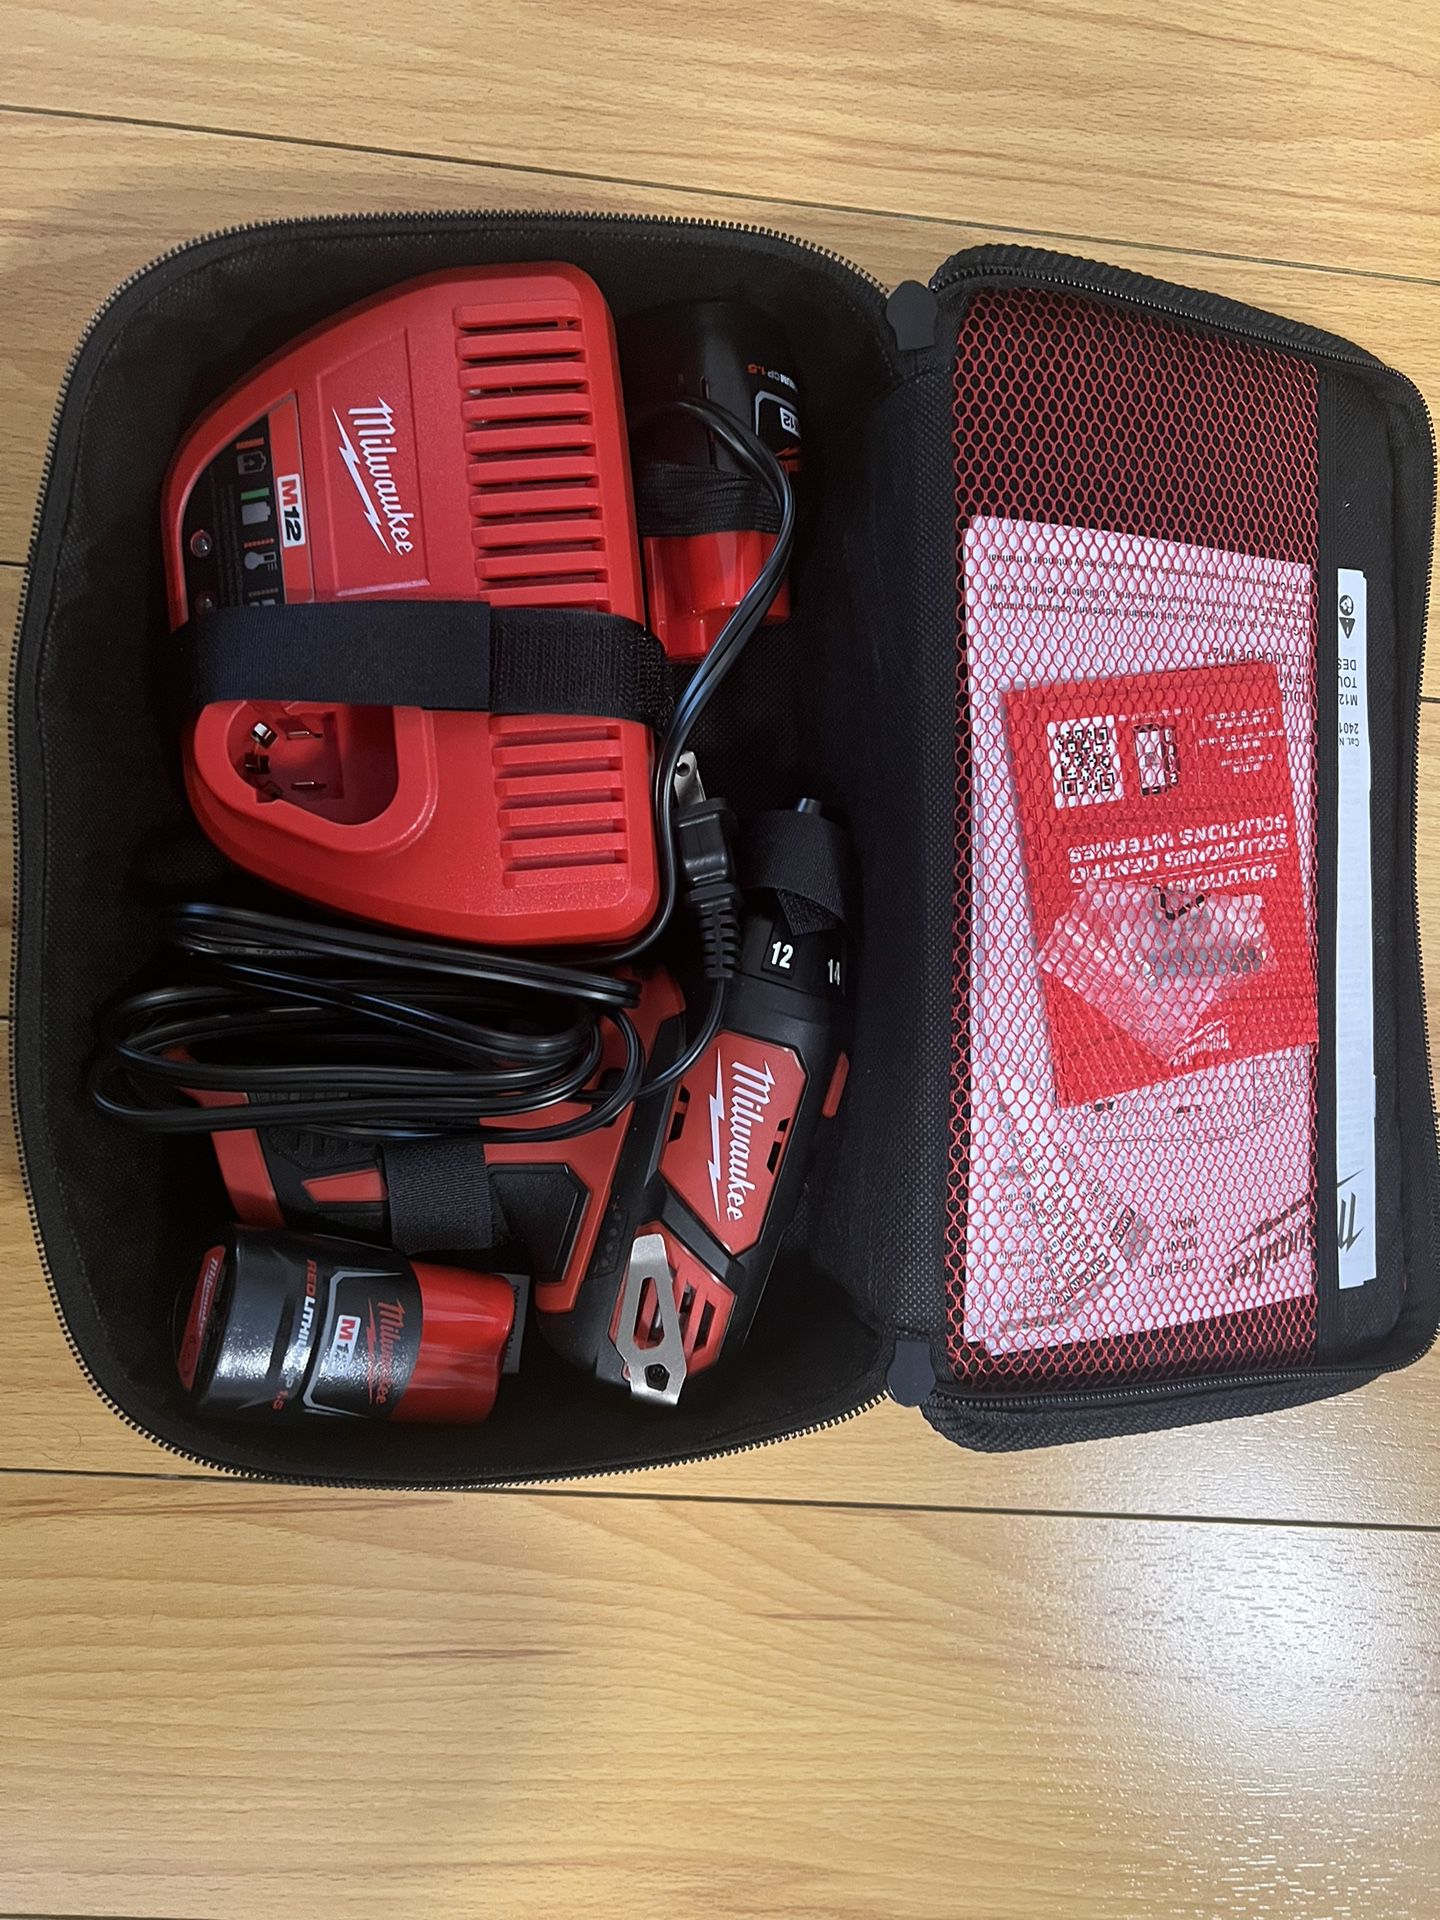 New Milwaukee M12 Drill With 2 Batteries and Charger 